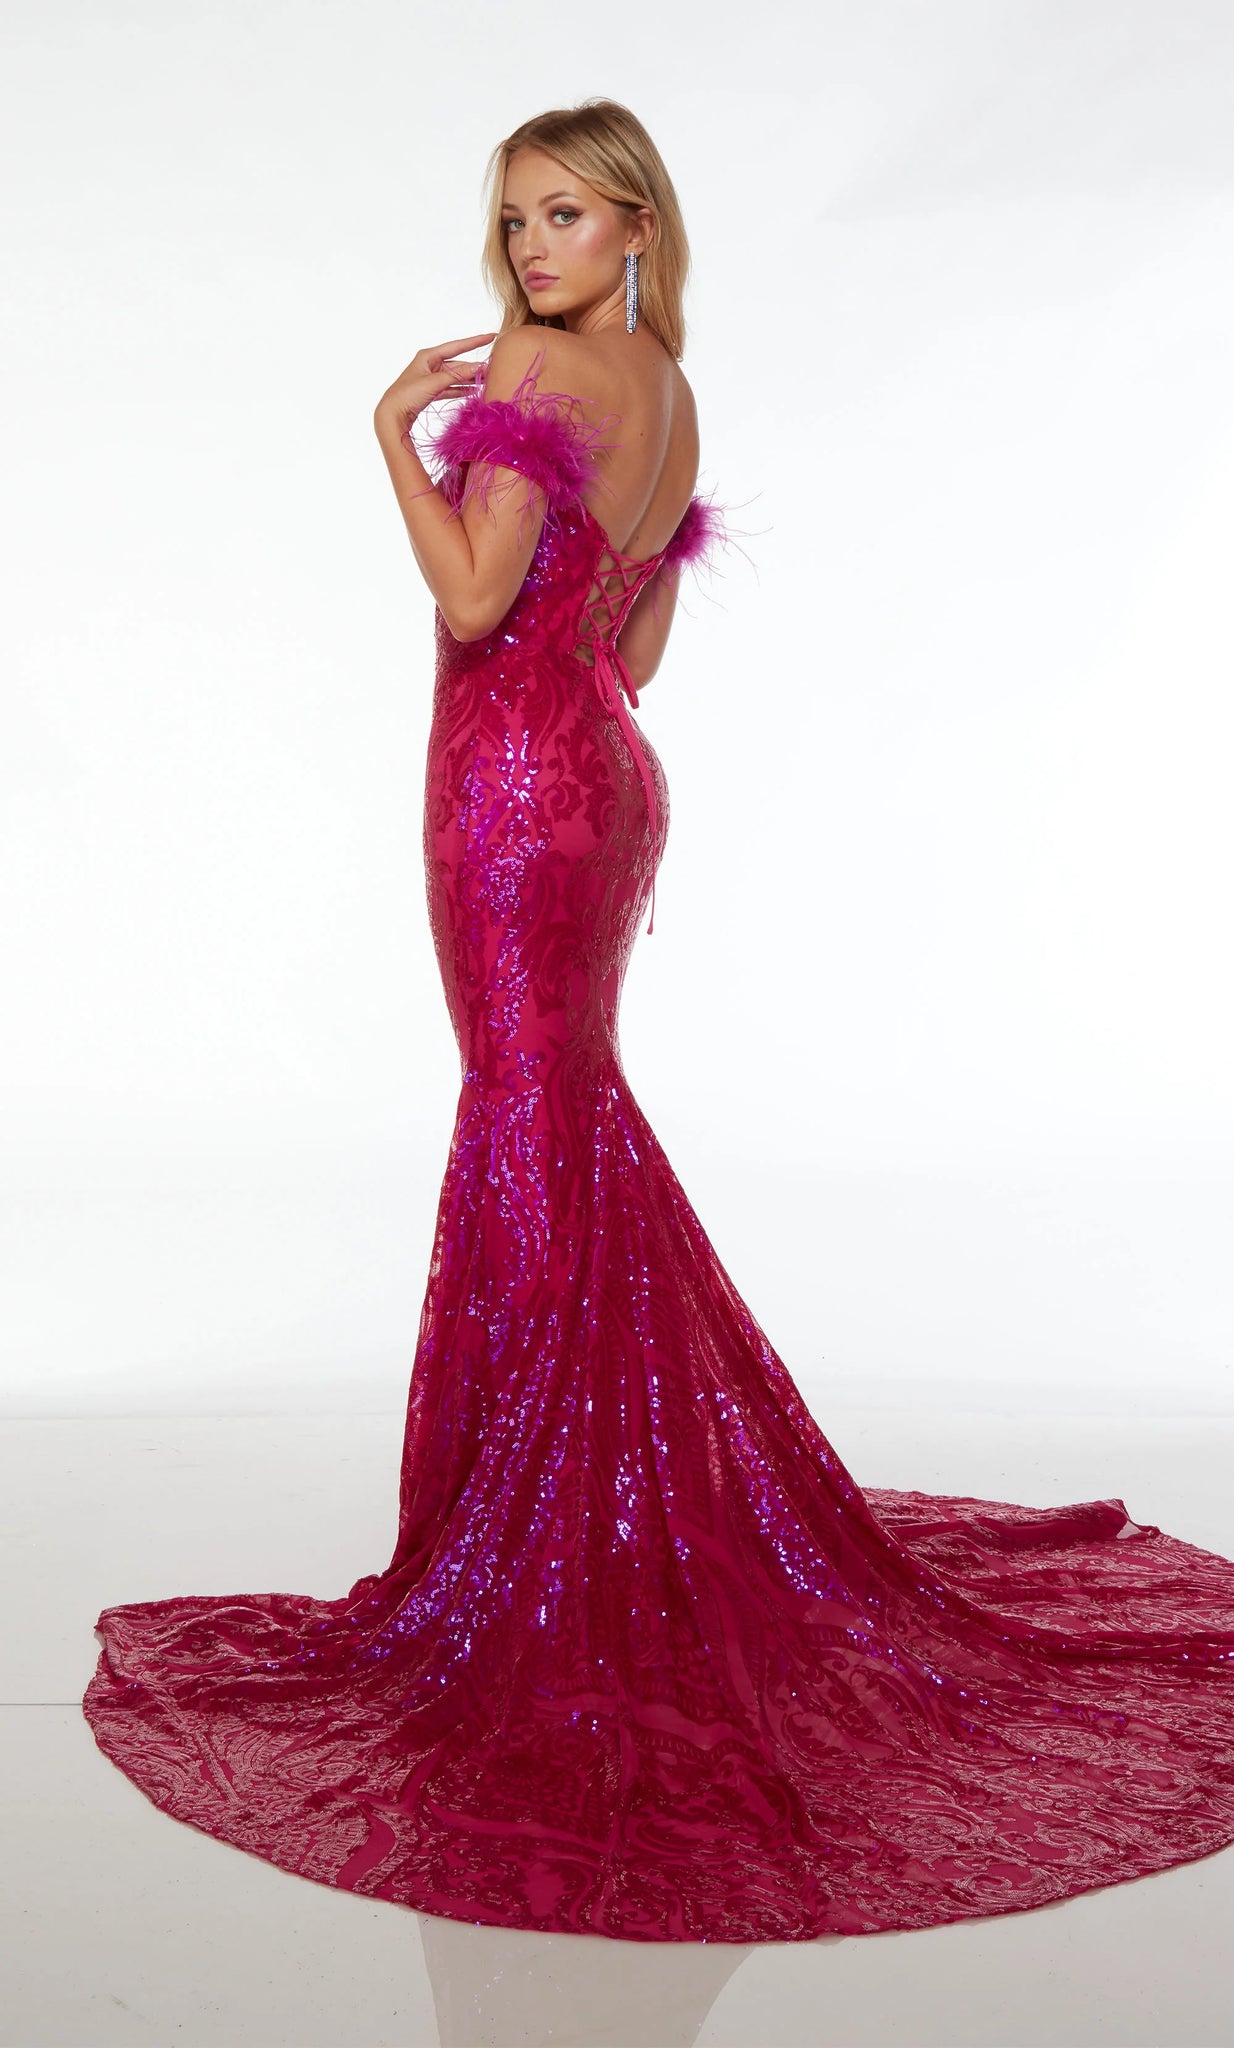 Dare to stand out at your event with this lavish Alyce Paris fitted prom dress 61595. From top to bottom, eye catching sequin patterns are featured to give you elegance and shine throughout the entire dress. The adjustable bodice and strapless neckline are complemented by soft off the shoulder feathered cap sleeves. 